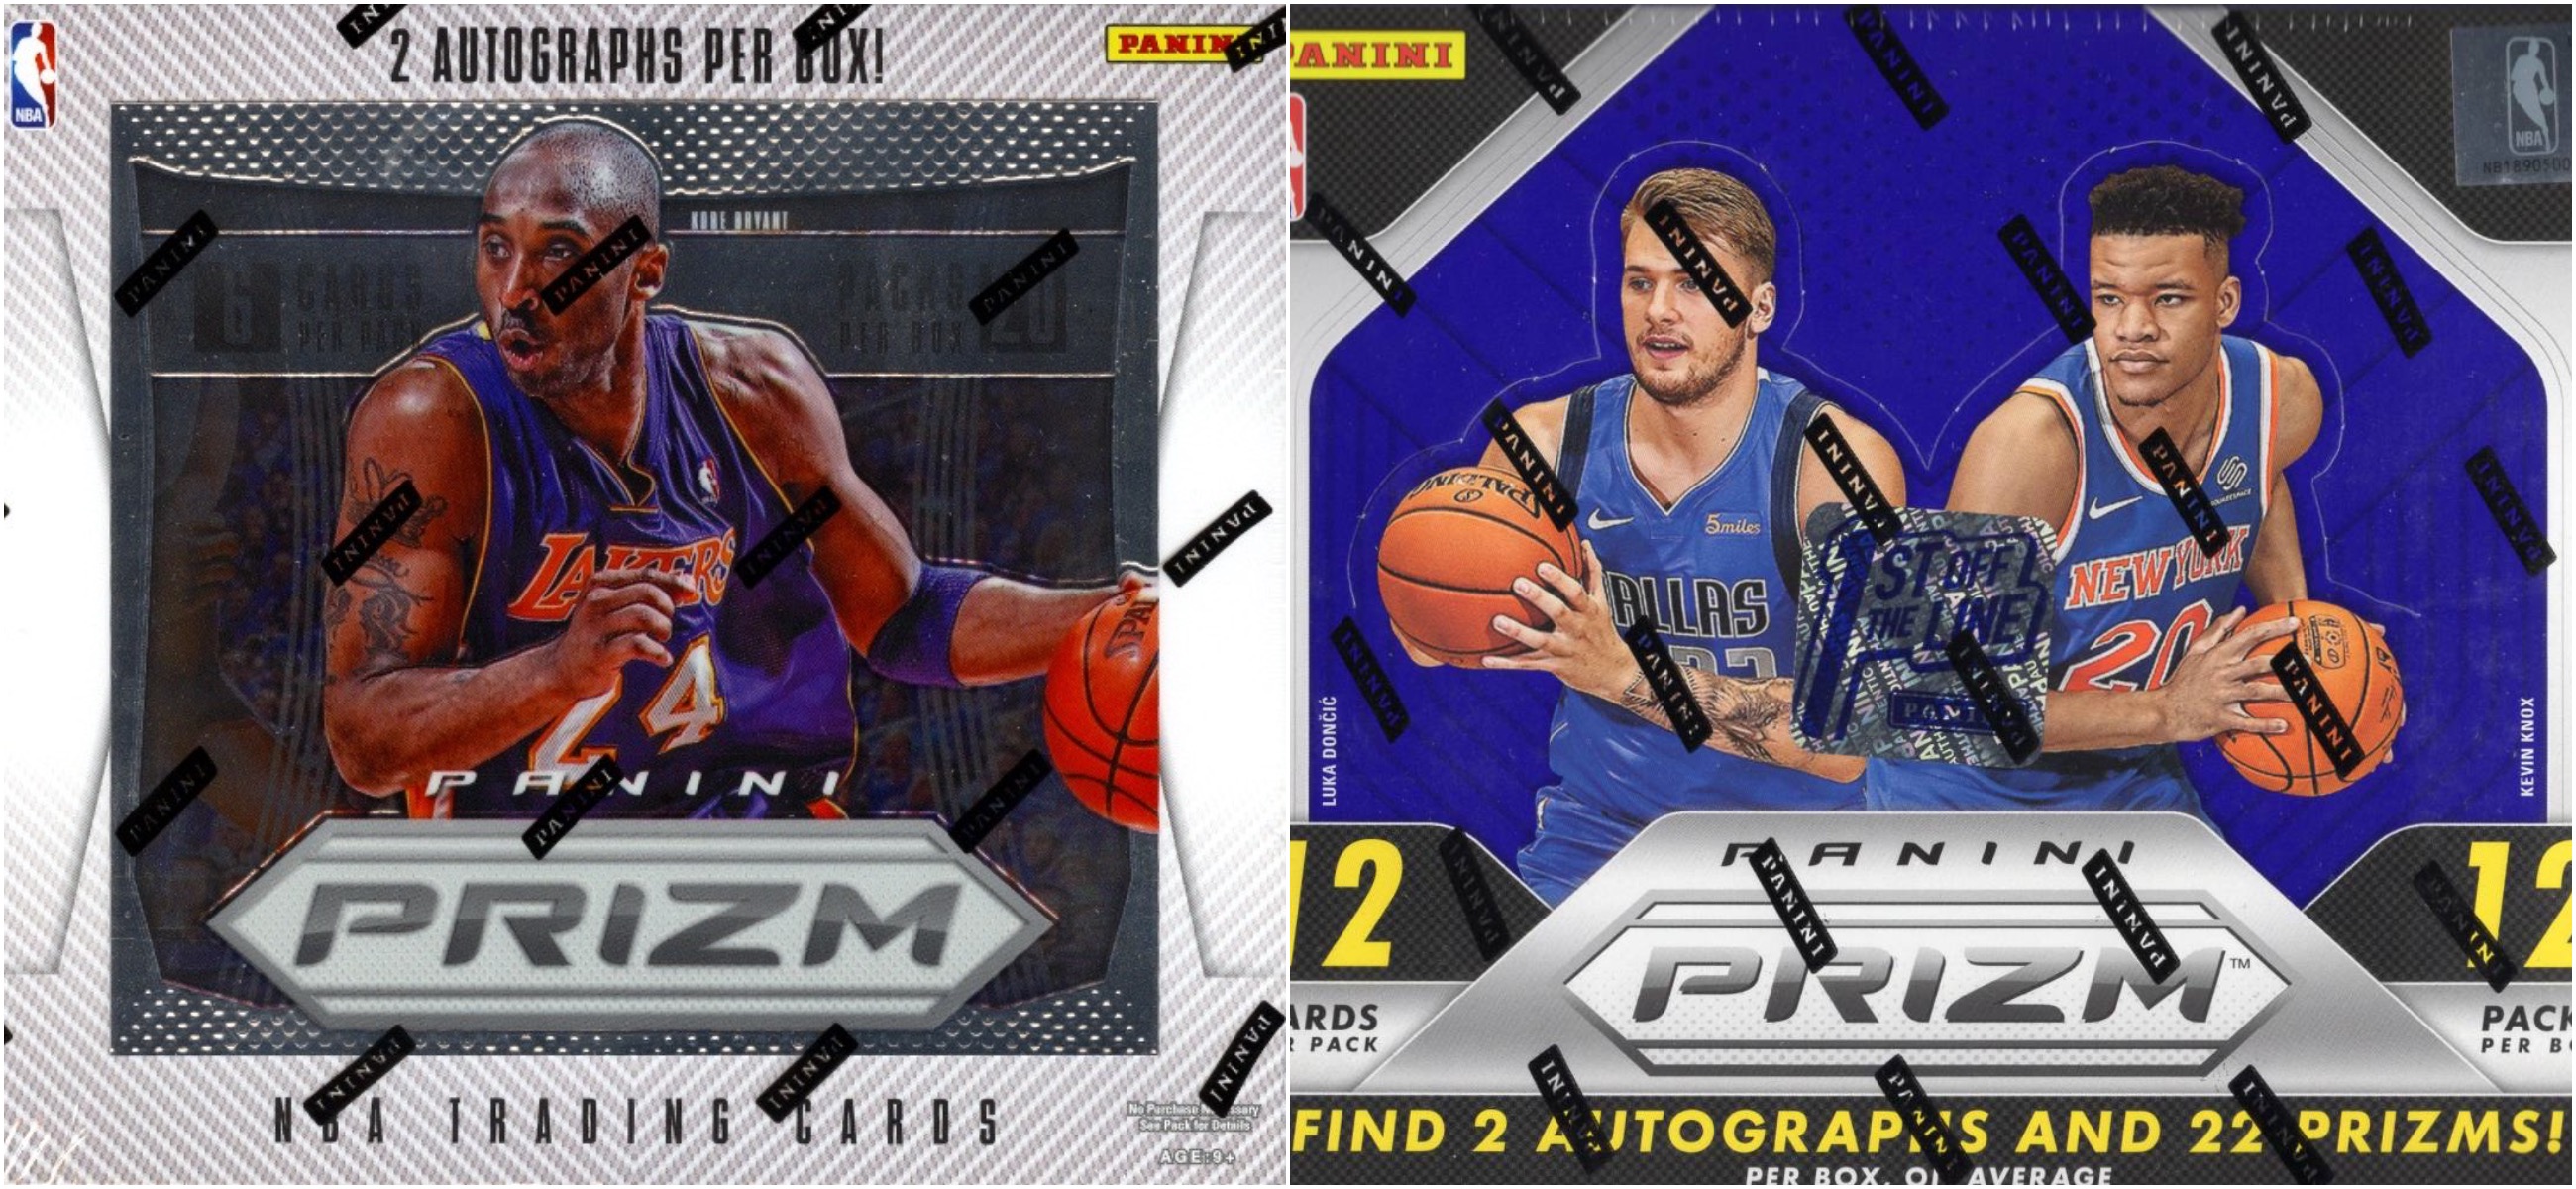 Two examples of Panini Prizm sports trading cards